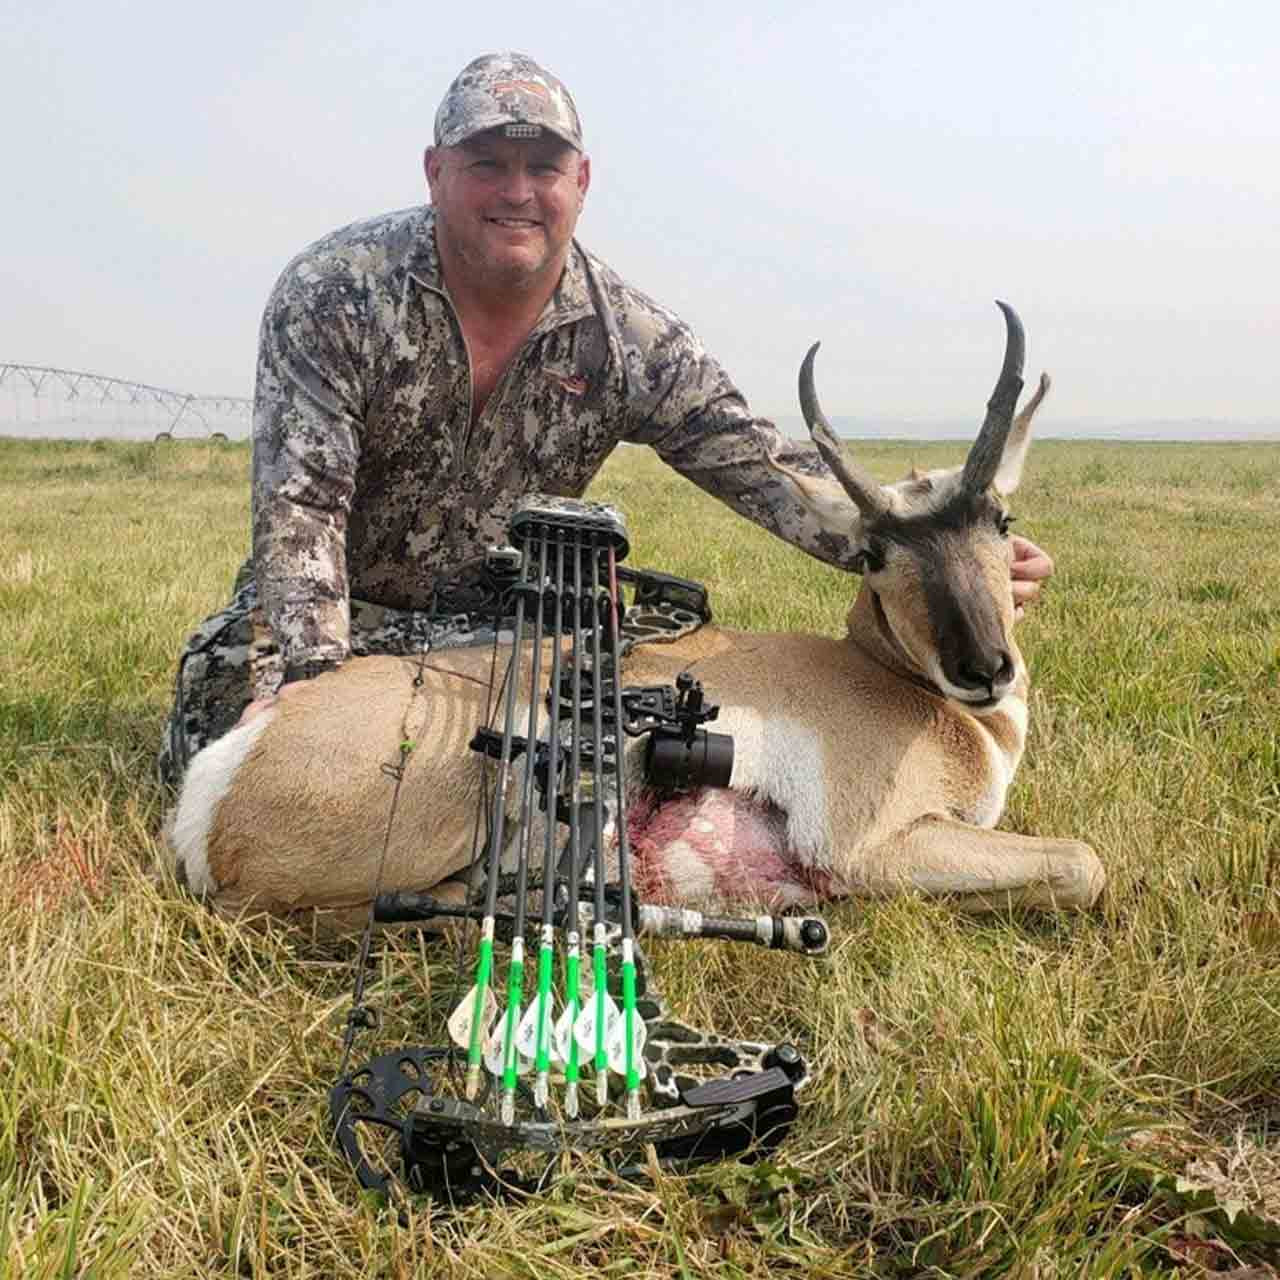 Archery antelope hunt at Anchor P Outfitters